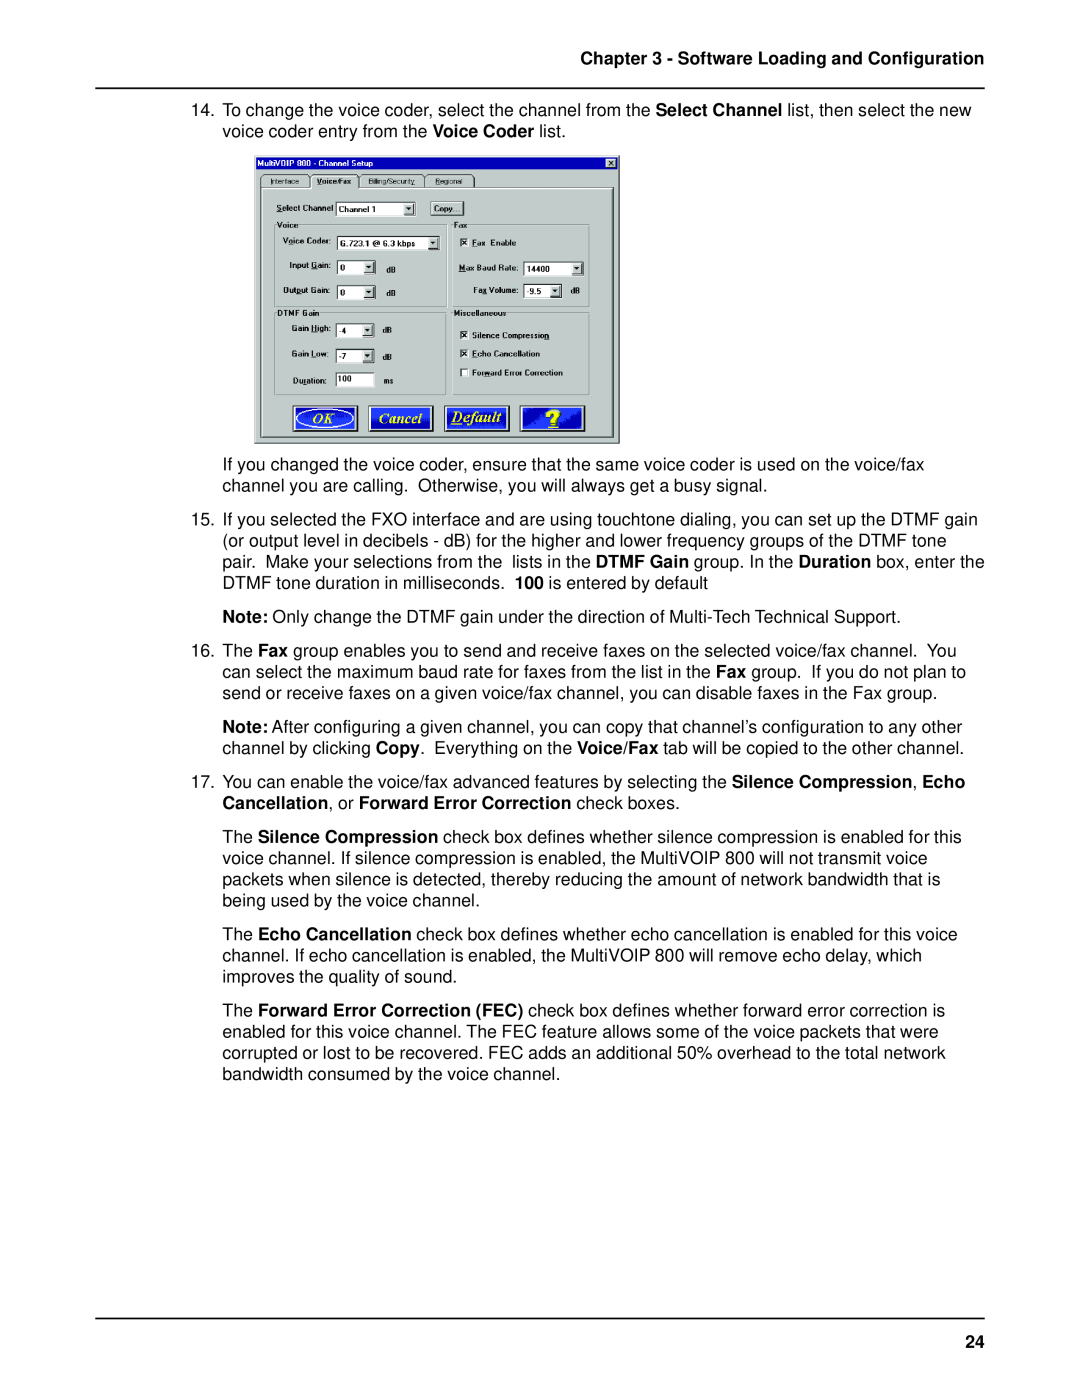 Multi-Tech Systems MVP 800 manual Software Loading and Configuration 